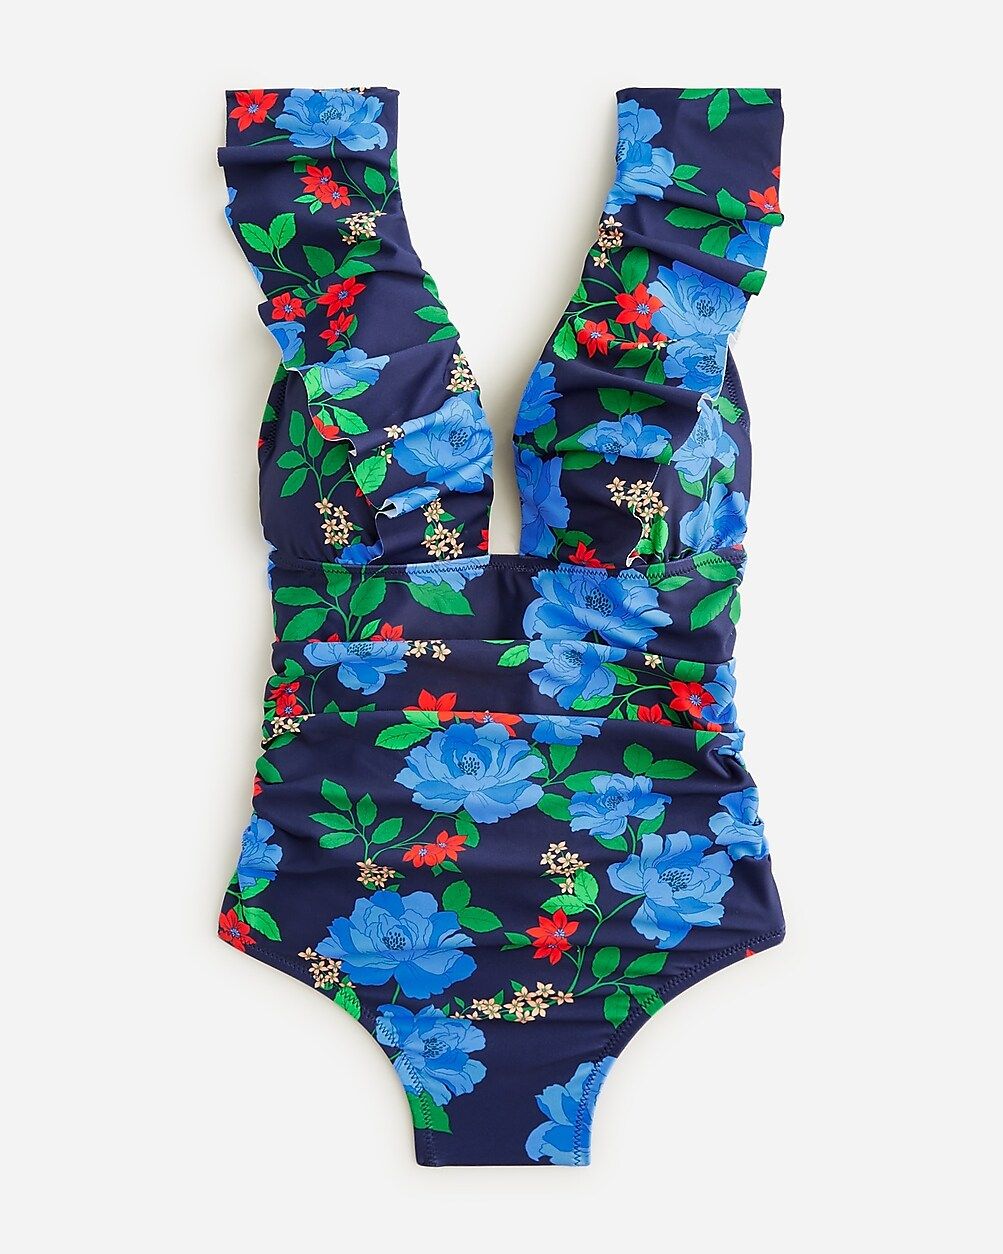 Ruffle V-neck ruched one-piece swimsuit in blue peony floral | J.Crew US